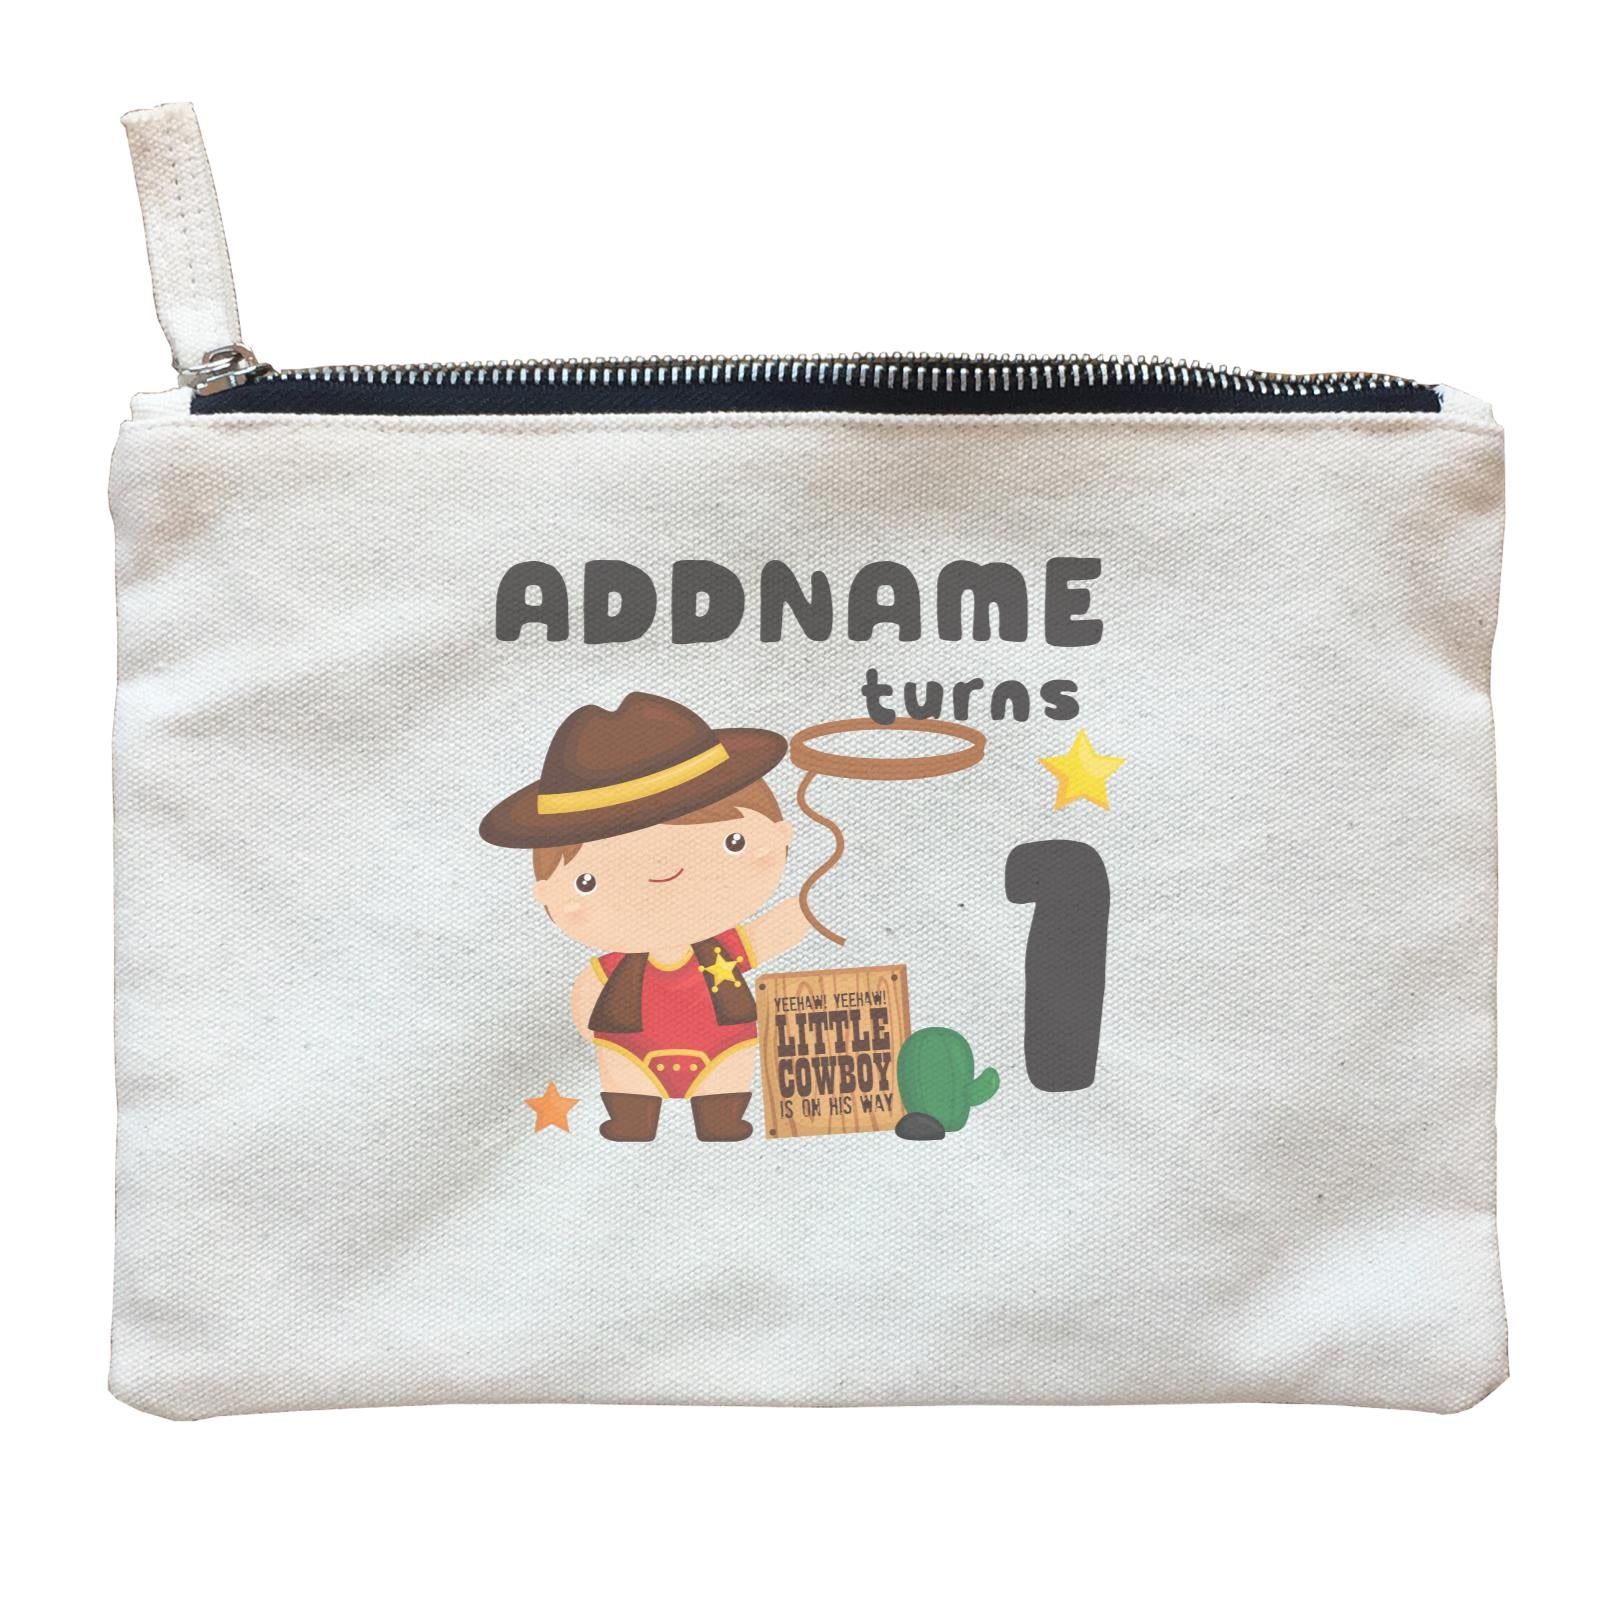 Birthday Cowboy Style Yeehaw Little Cowboy Is On His Way Addname Turns 1 Zipper Pouch